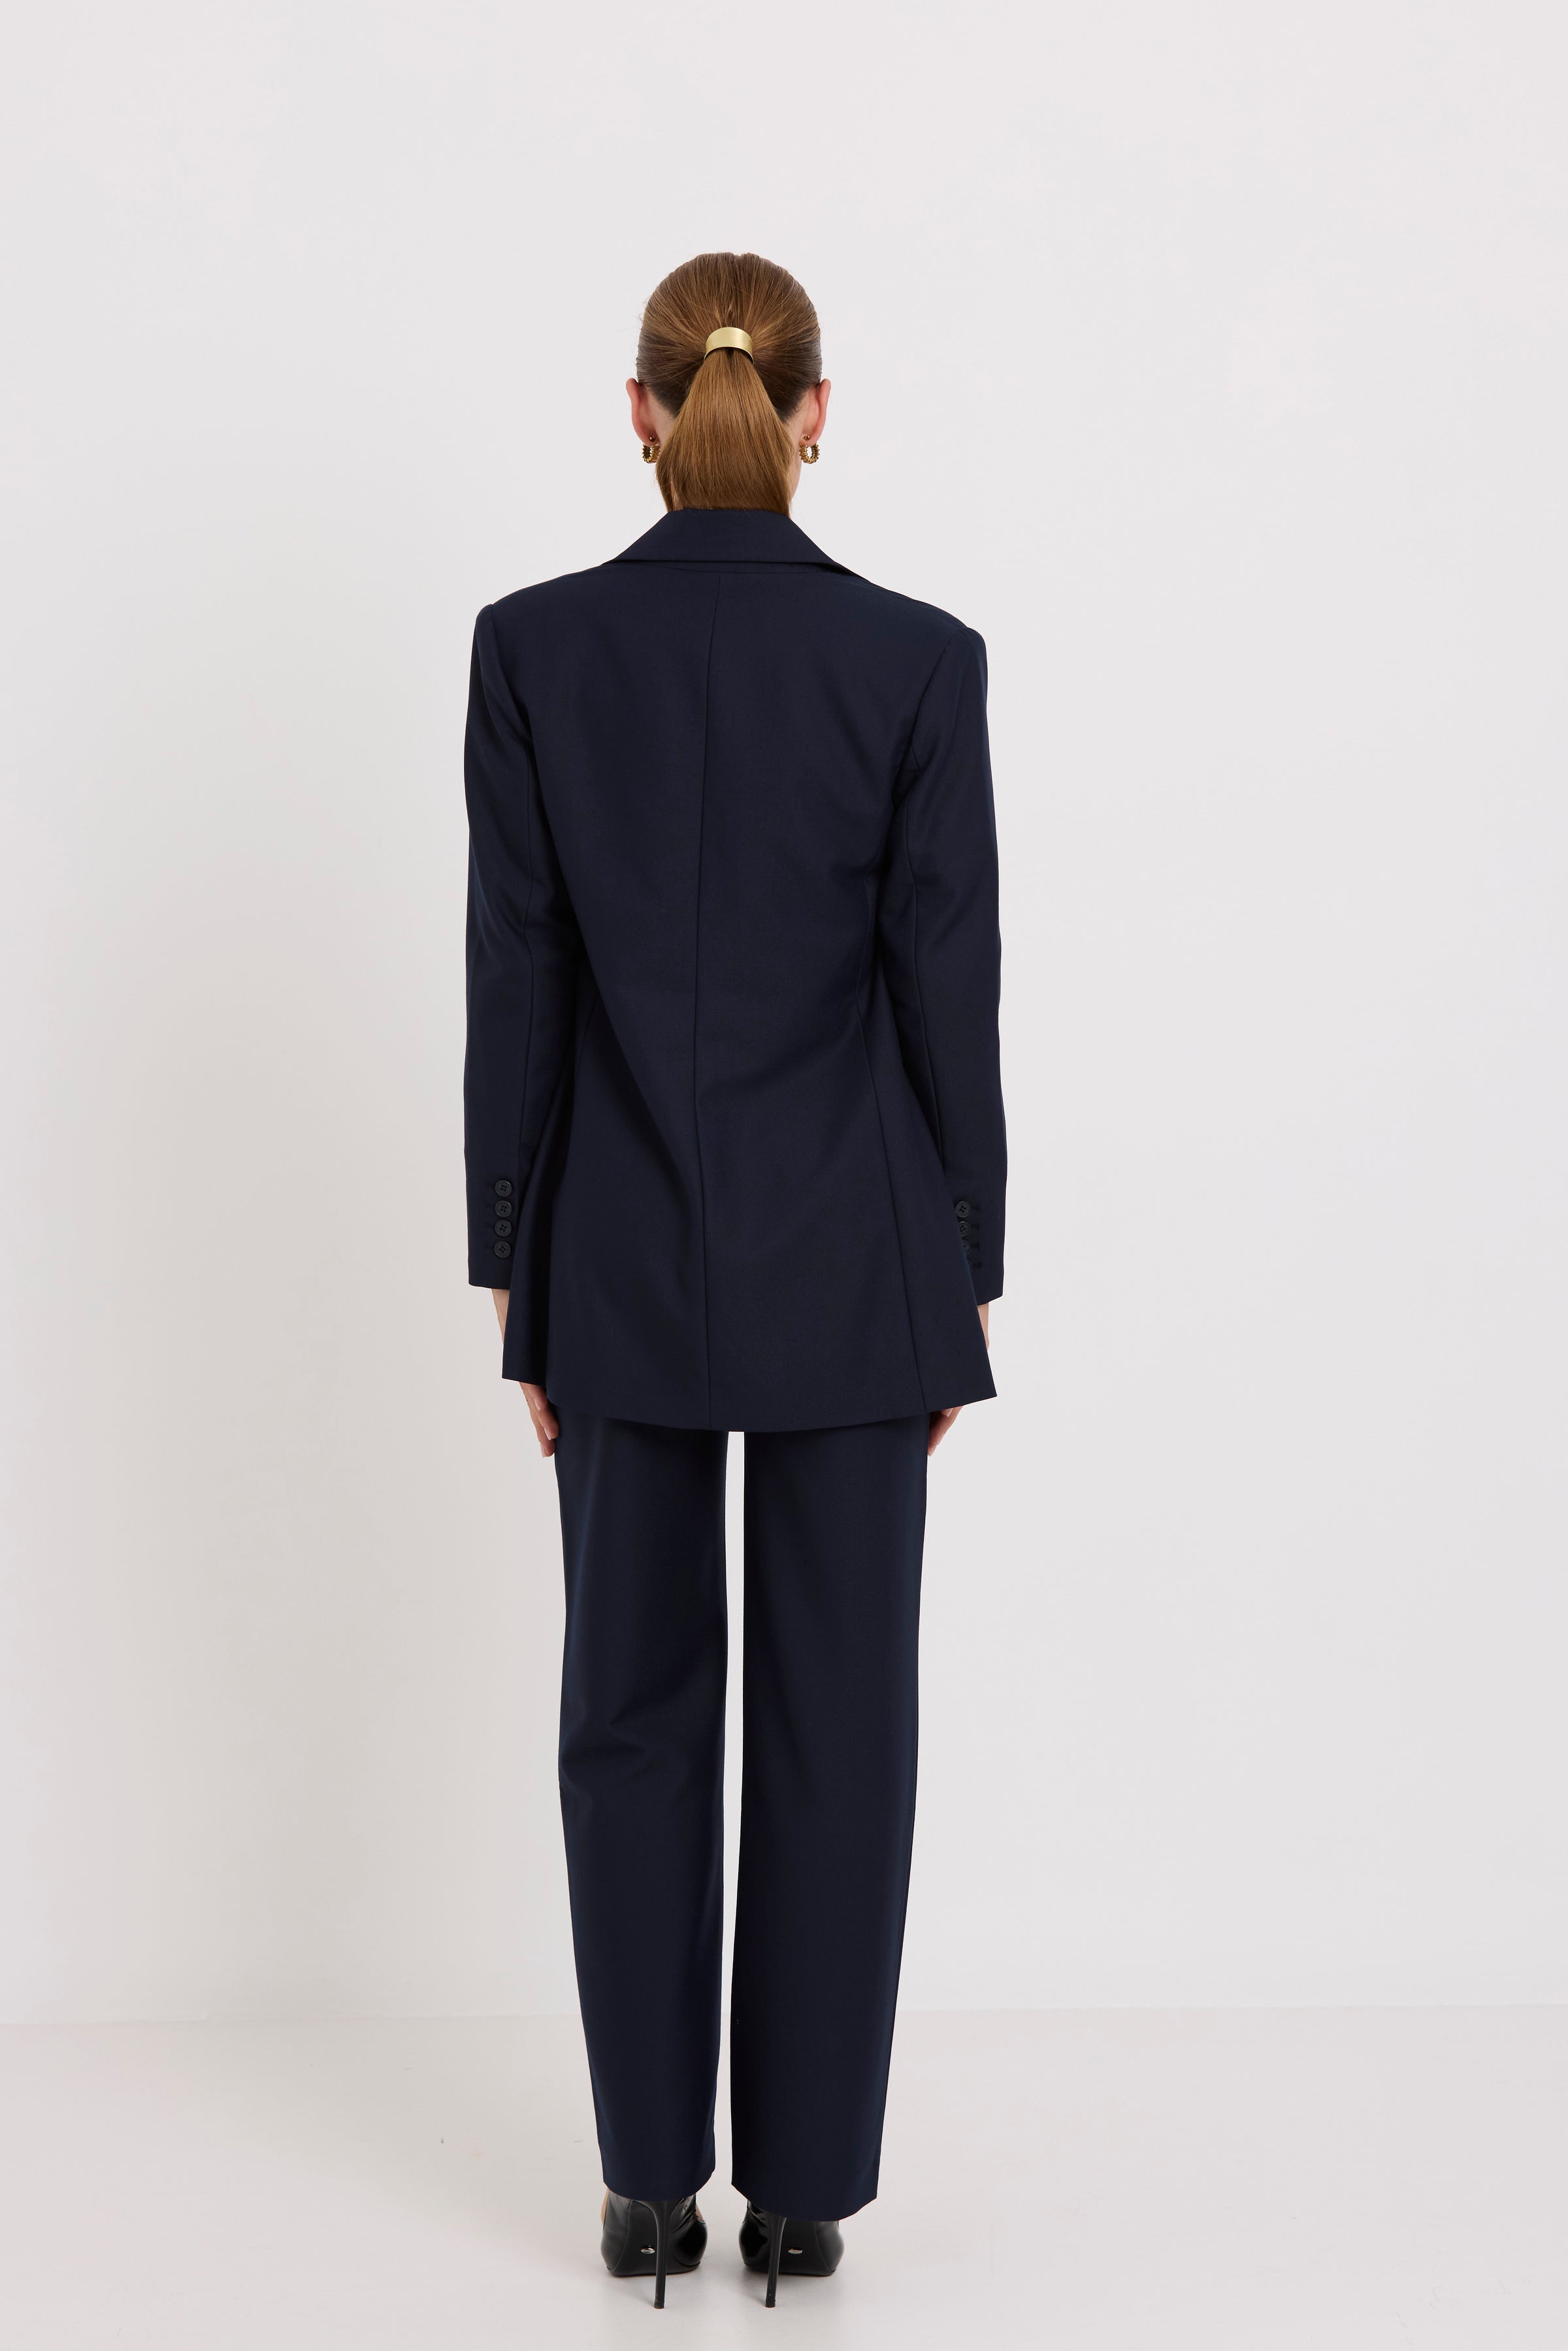 TUESDAY LABEL - King Blazer (Navy Suiting)